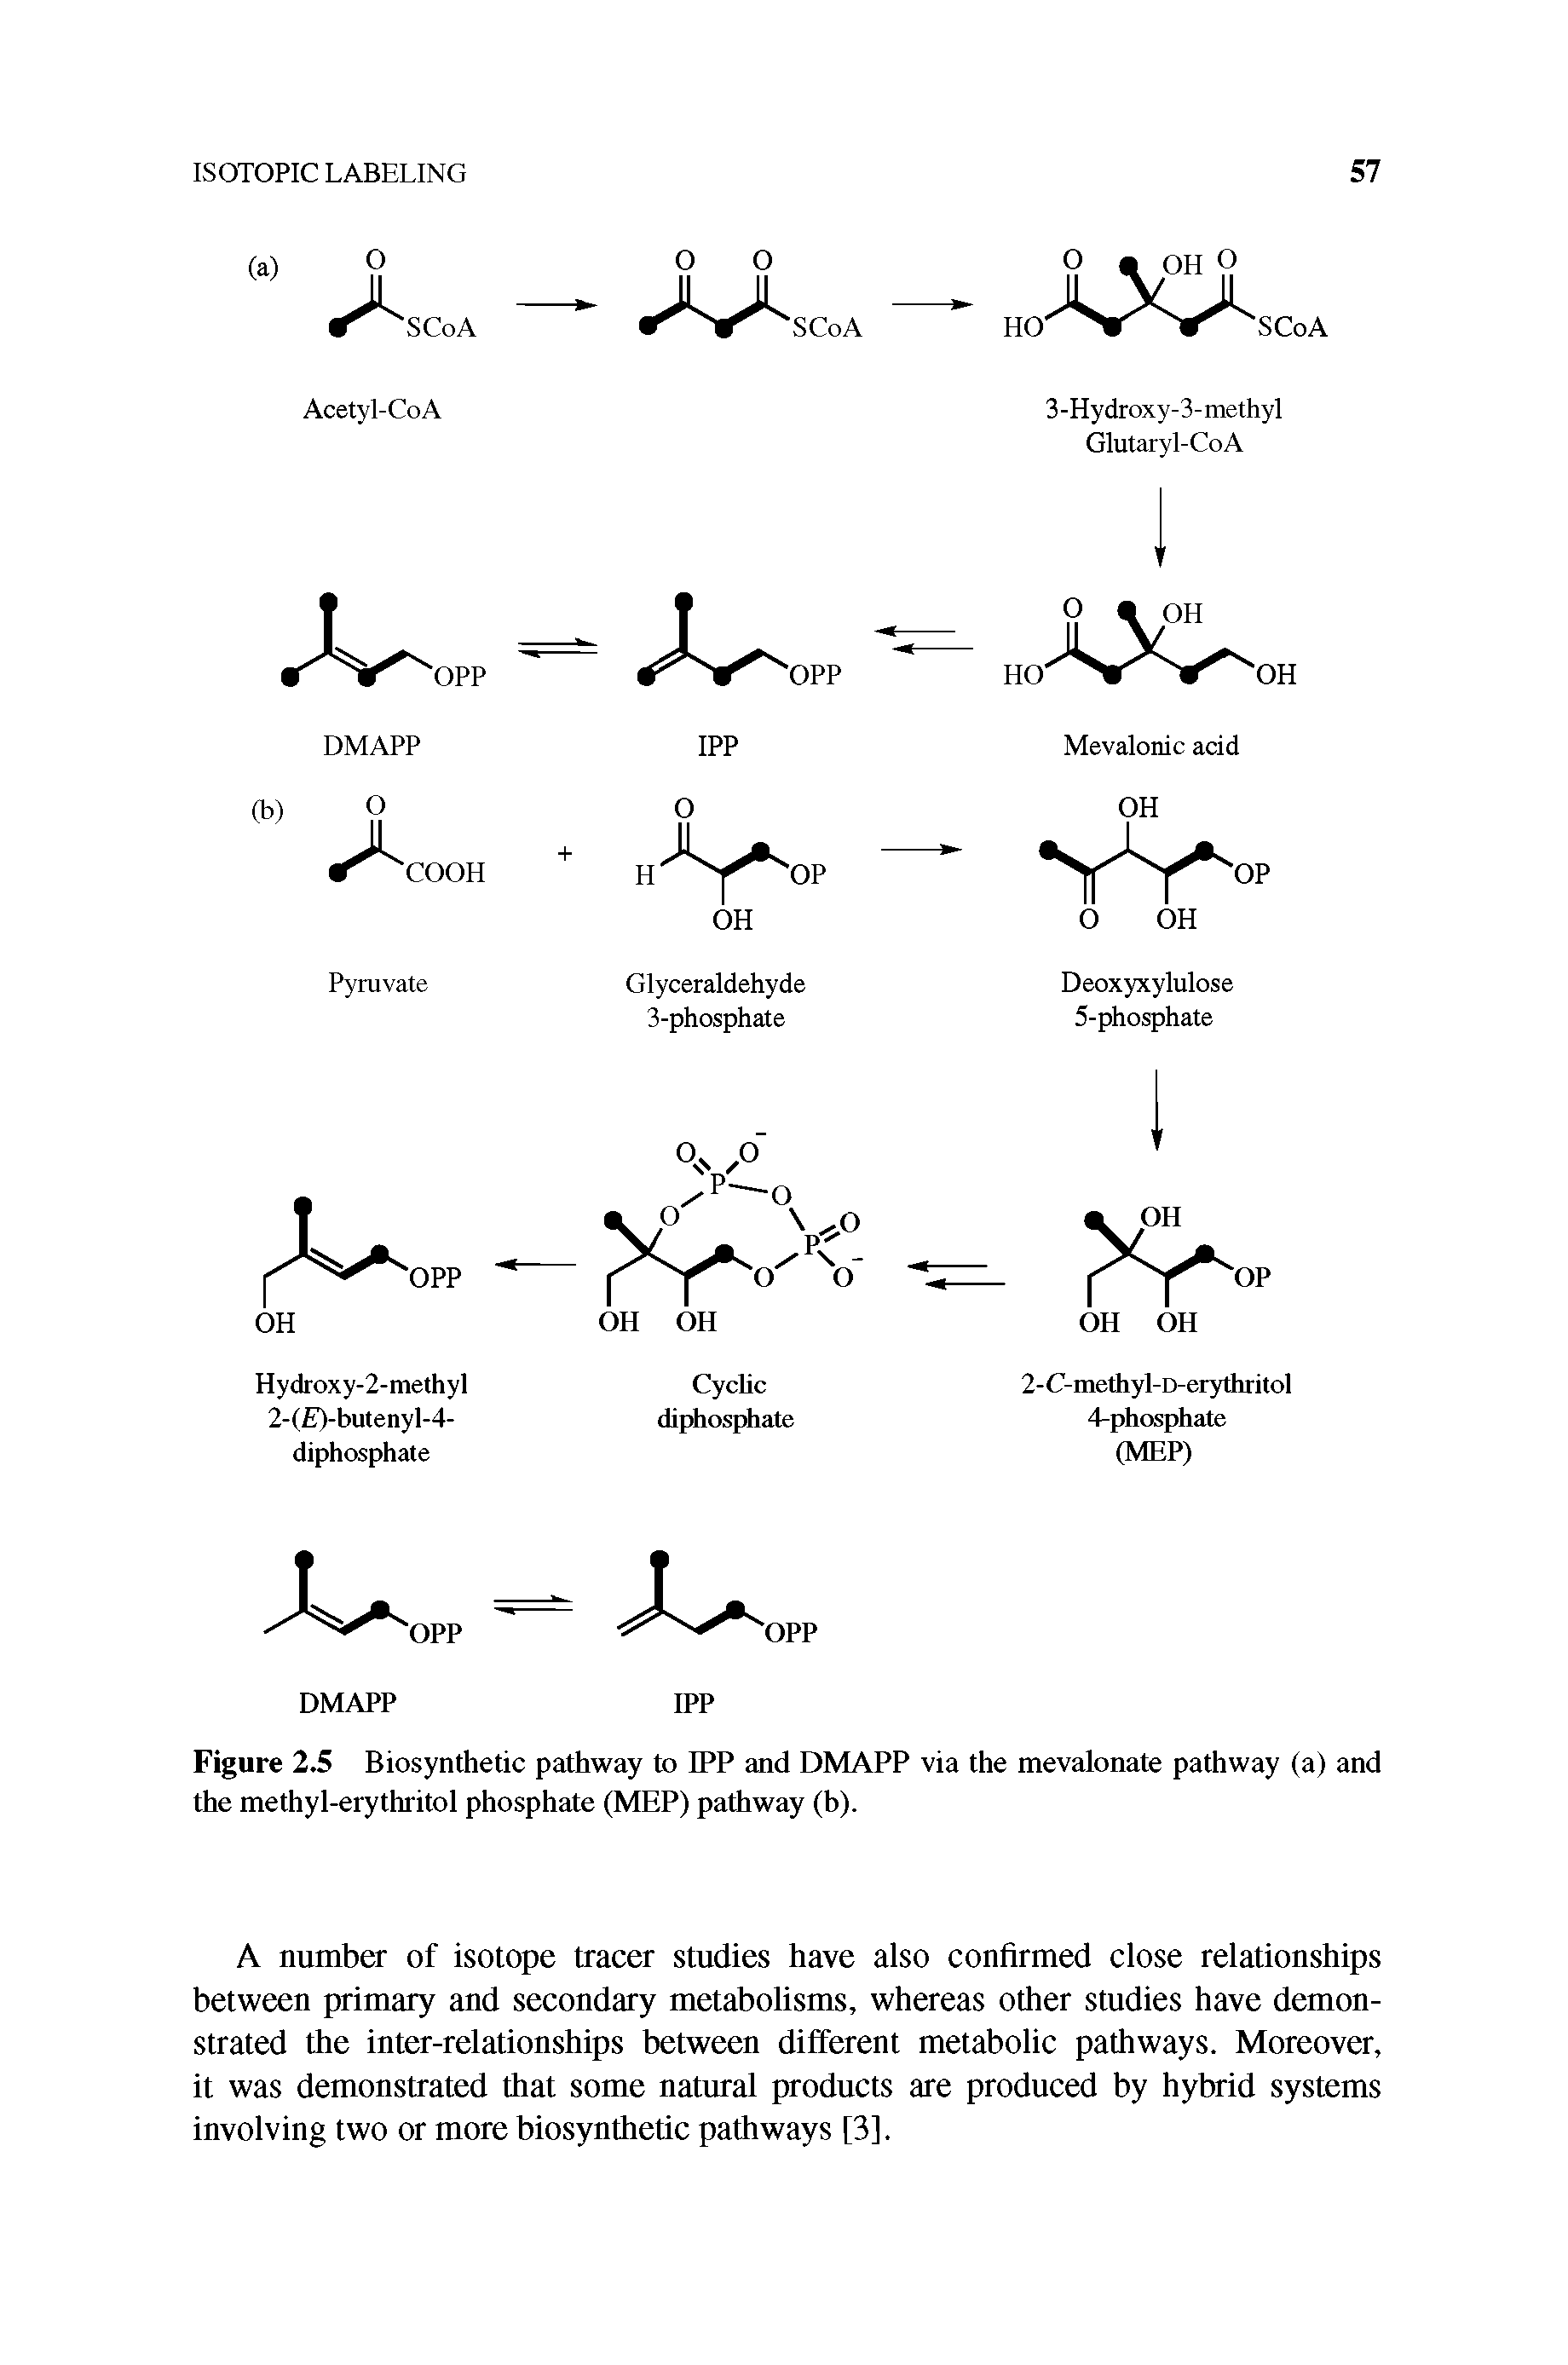 Figure 2.5 Biosynthetic pathway to IPP and DMAPP via the mevalonate pathway (a) and the methyl-erythritol phosphate (MEP) pathway (h).